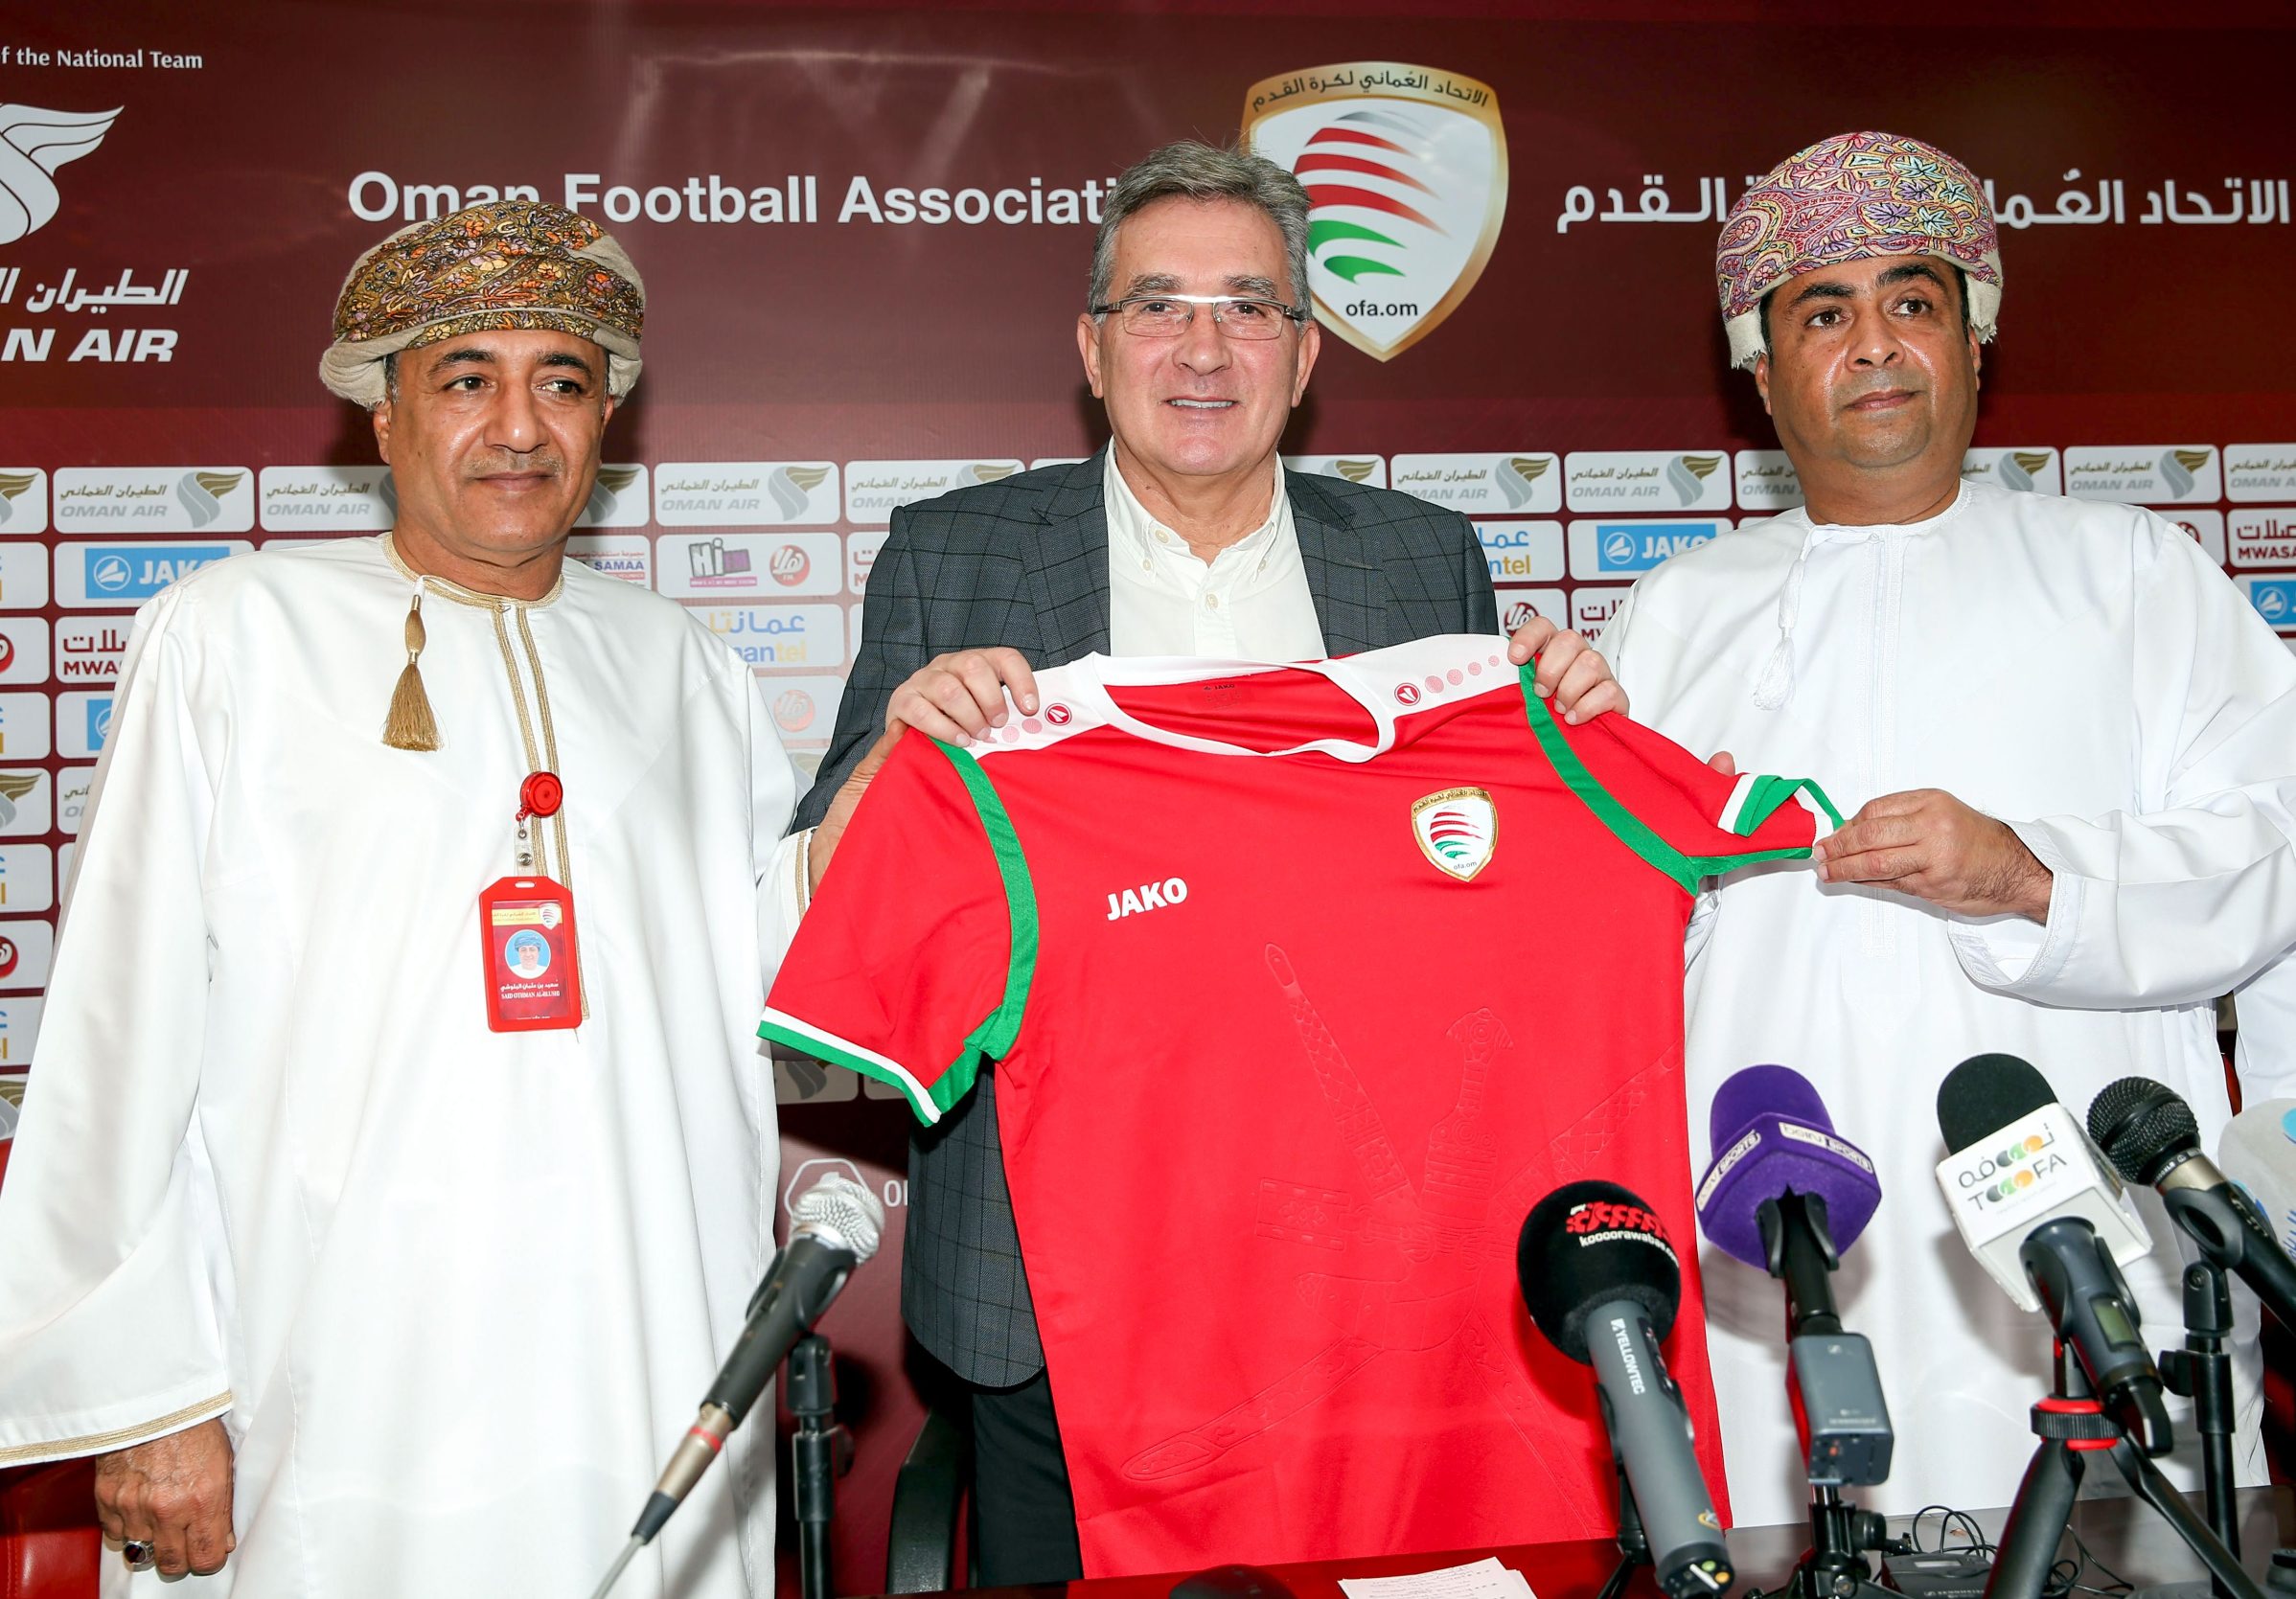 Croatian coach Branko Ivankovic (C) poses for a picture with the jersey during a press conference announcing his the new head coach of the Omani national team on January 29, 2020, in the capital Muscat (Photo by MOHAMMED MAHJOUB / AFP)